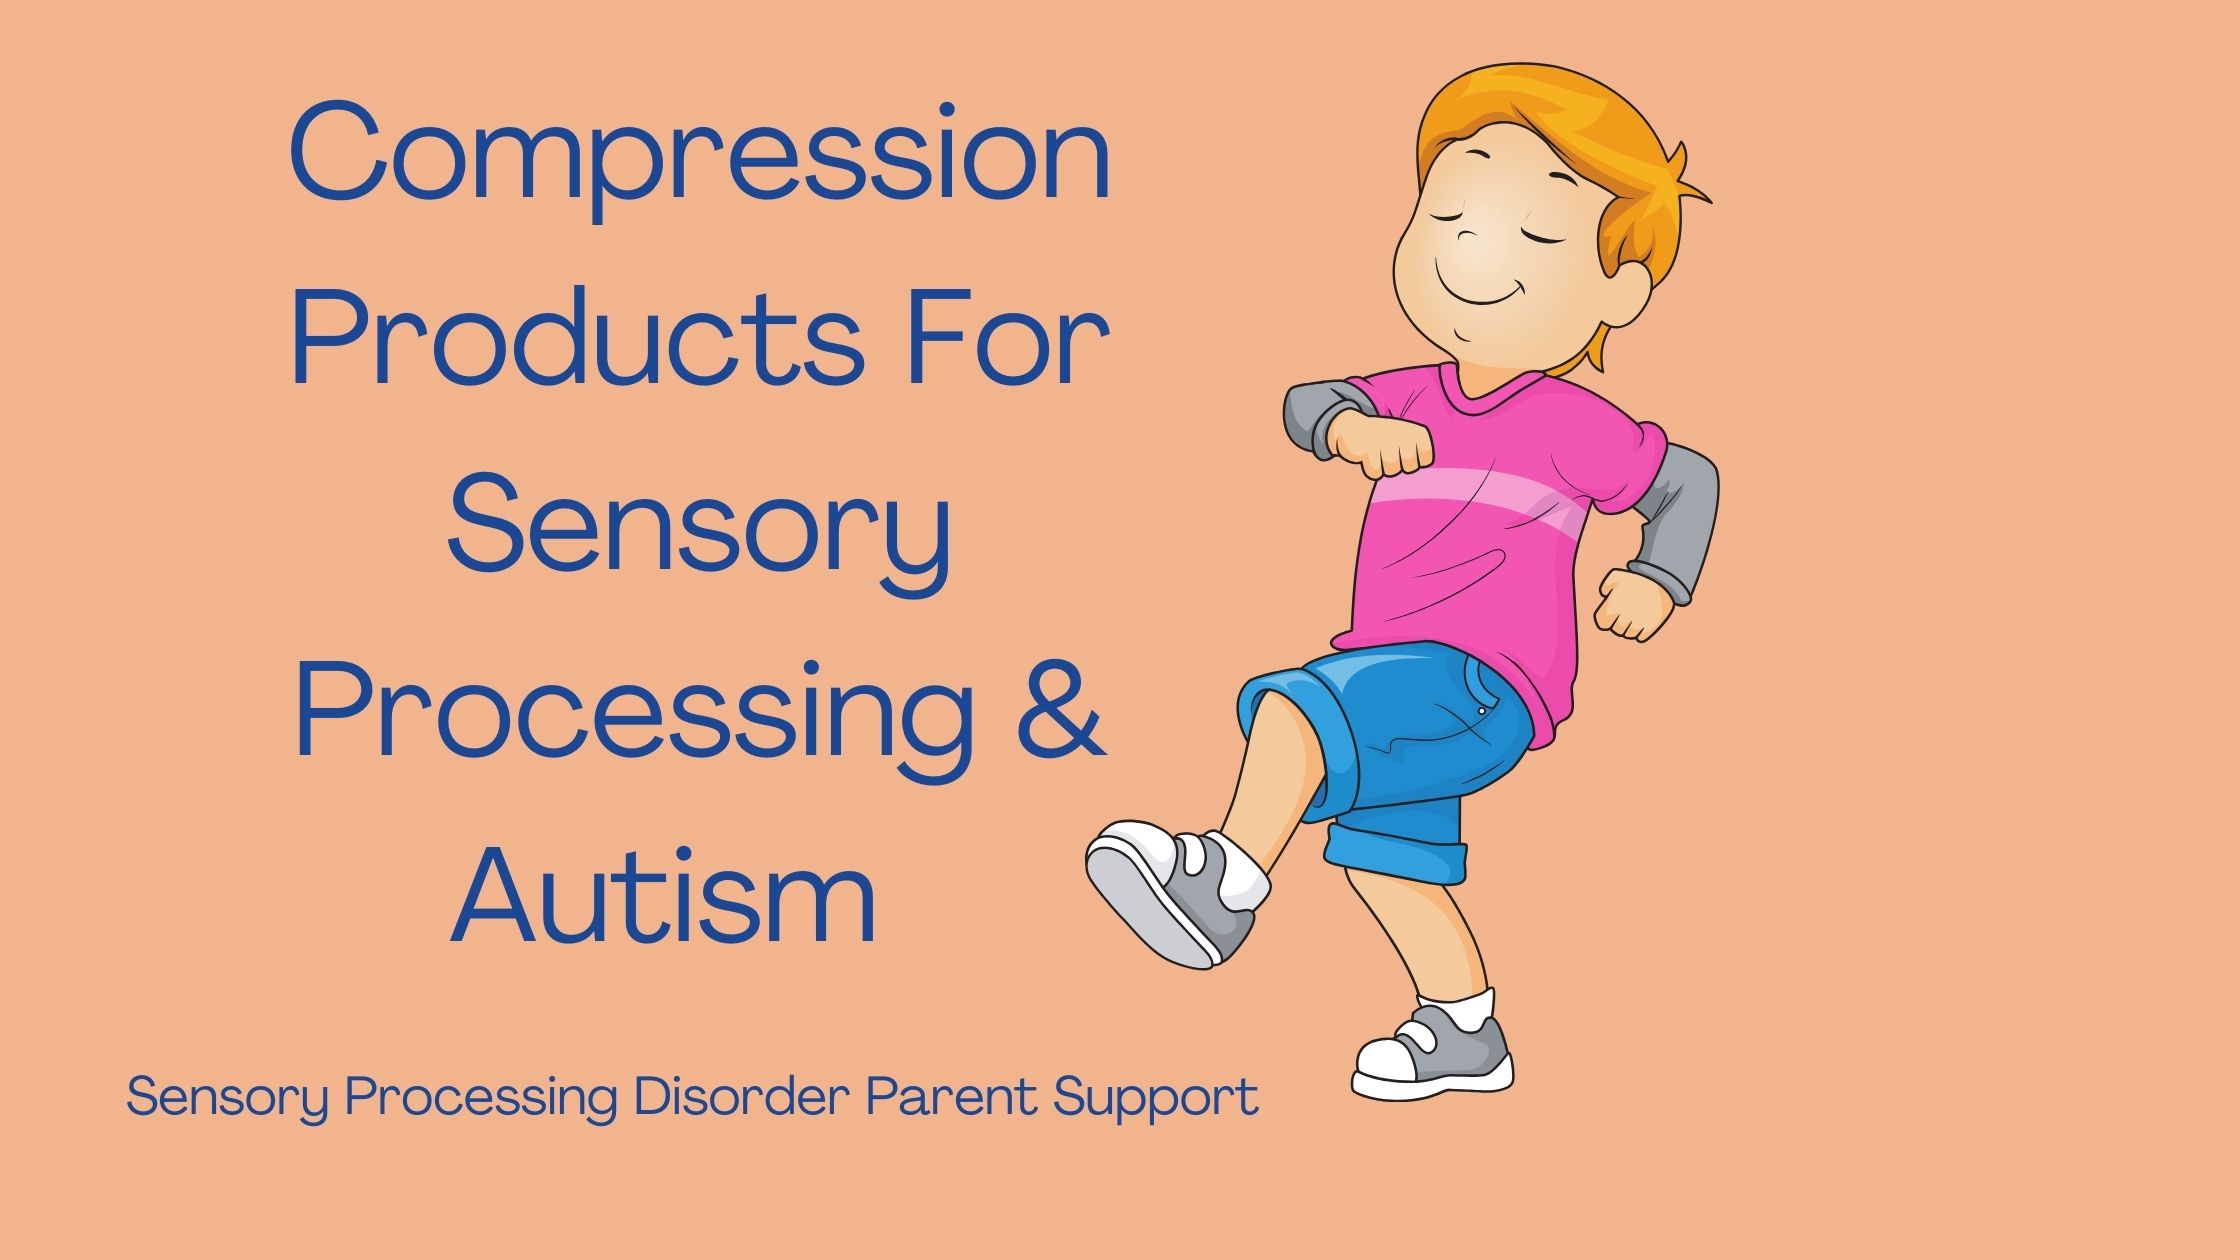 child with sensory processing disorder wearing a compression shirt Compression Products For Sensory Processing & Autism